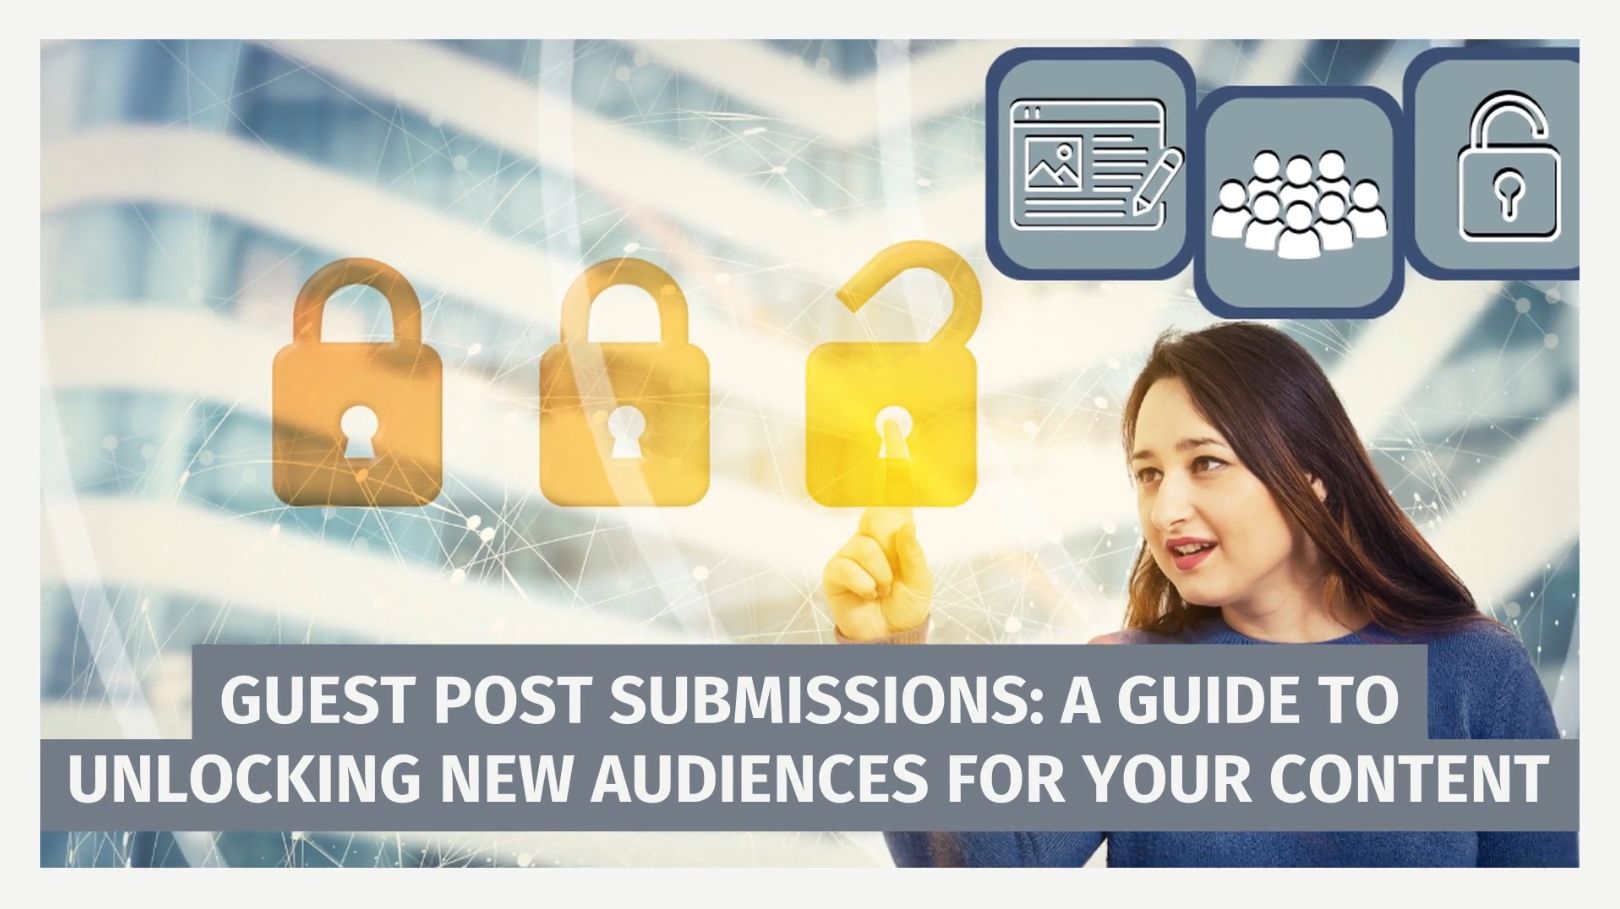 Guest Post Submissions: A Guide to Unlocking New Audiences for Your Content